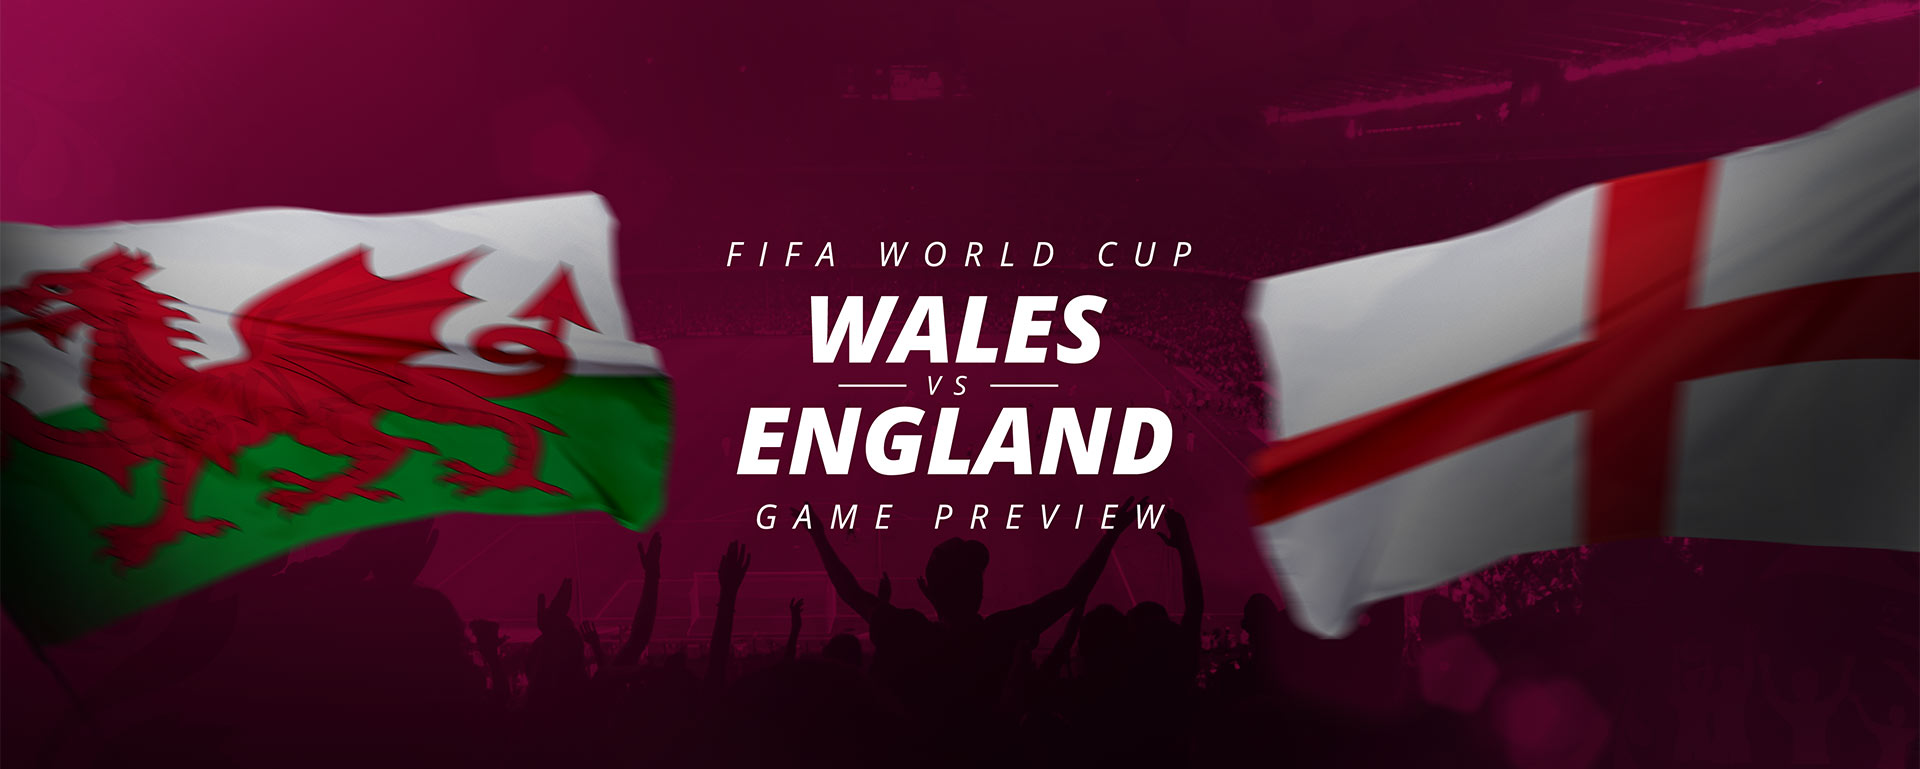 FIFA WORLD CUP: WALES V ENGLAND – GAME PREVIEW